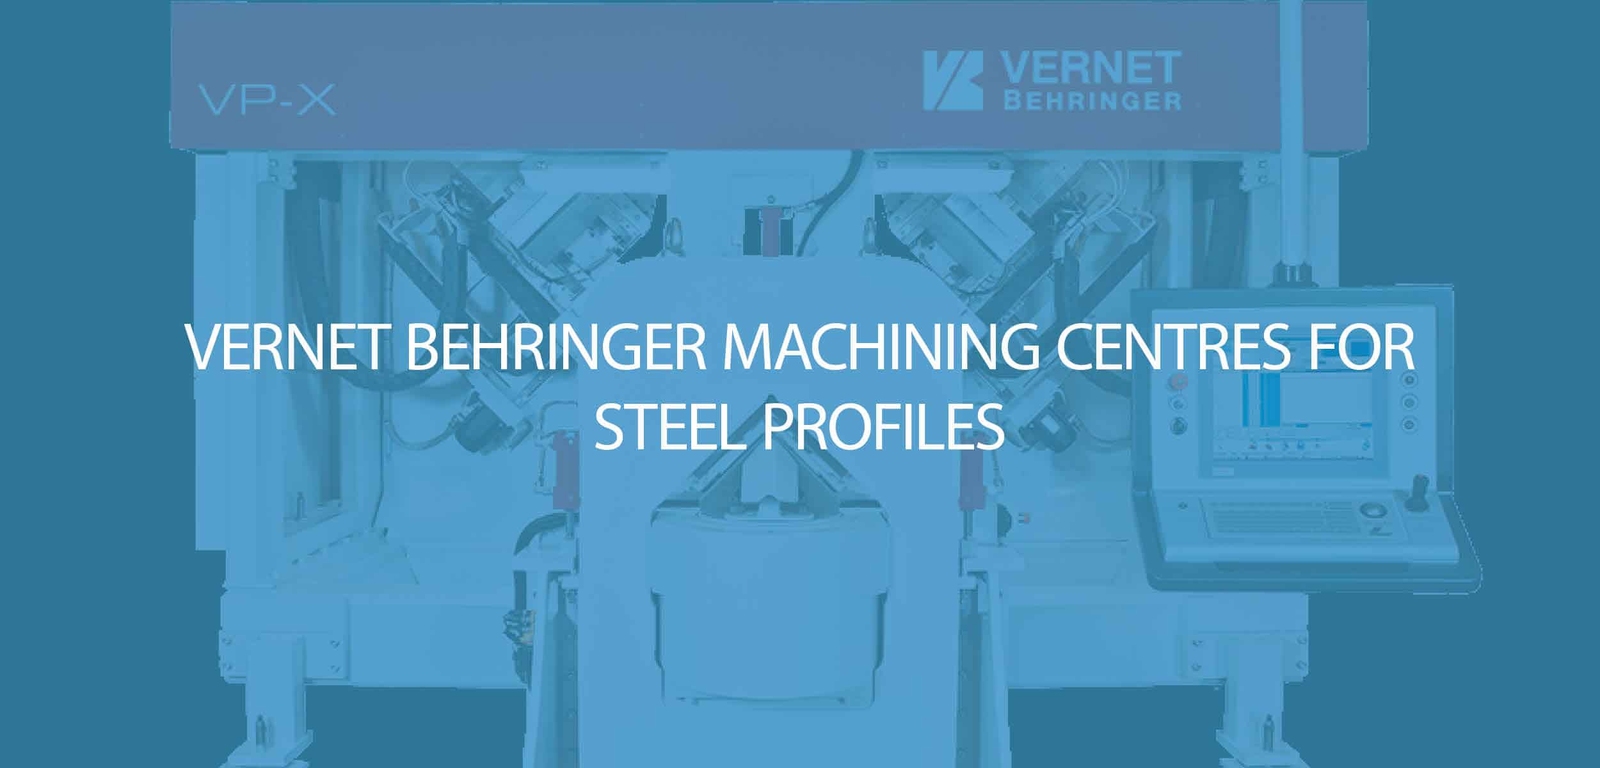 Vernet Behringer Machining Centres for Steel Profiles